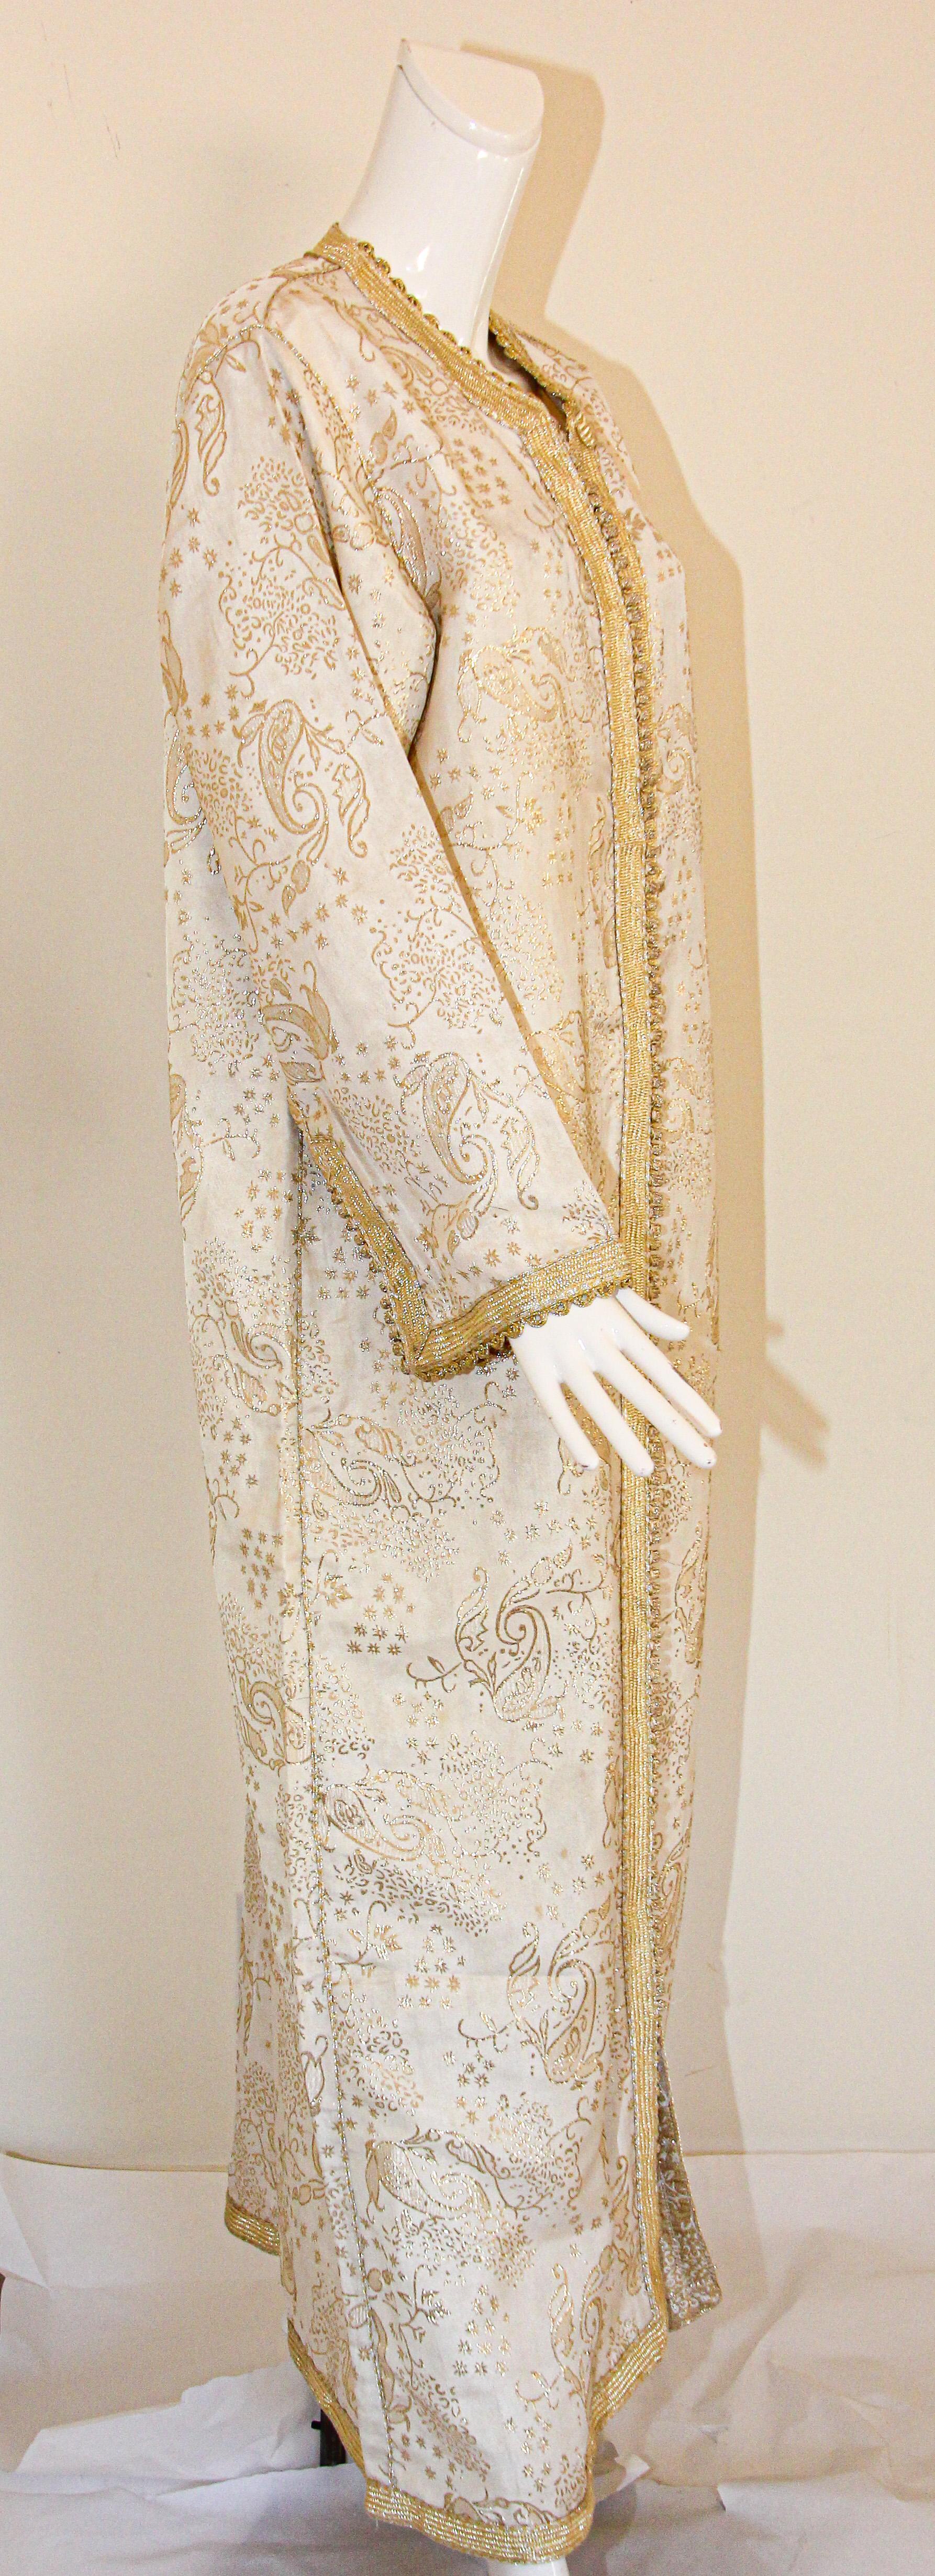 Elegant Moroccan White Caftan with Gold Metallic Floral Brocade For Sale 4